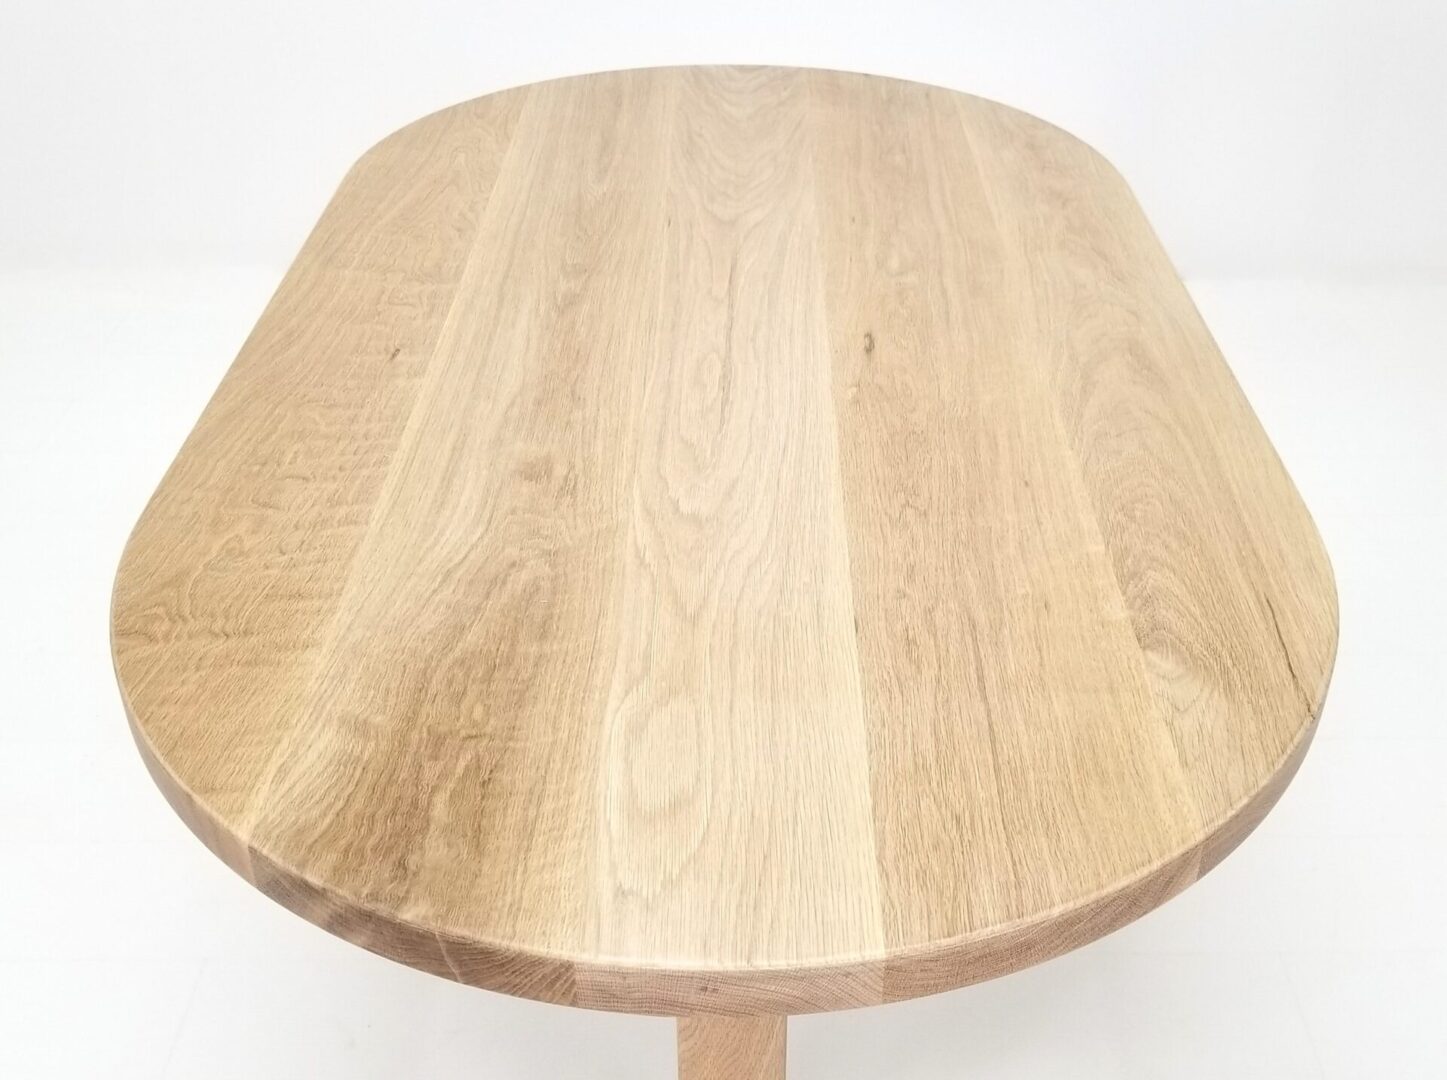 A close up of a oval top trestle dining table with a round top and two legs.